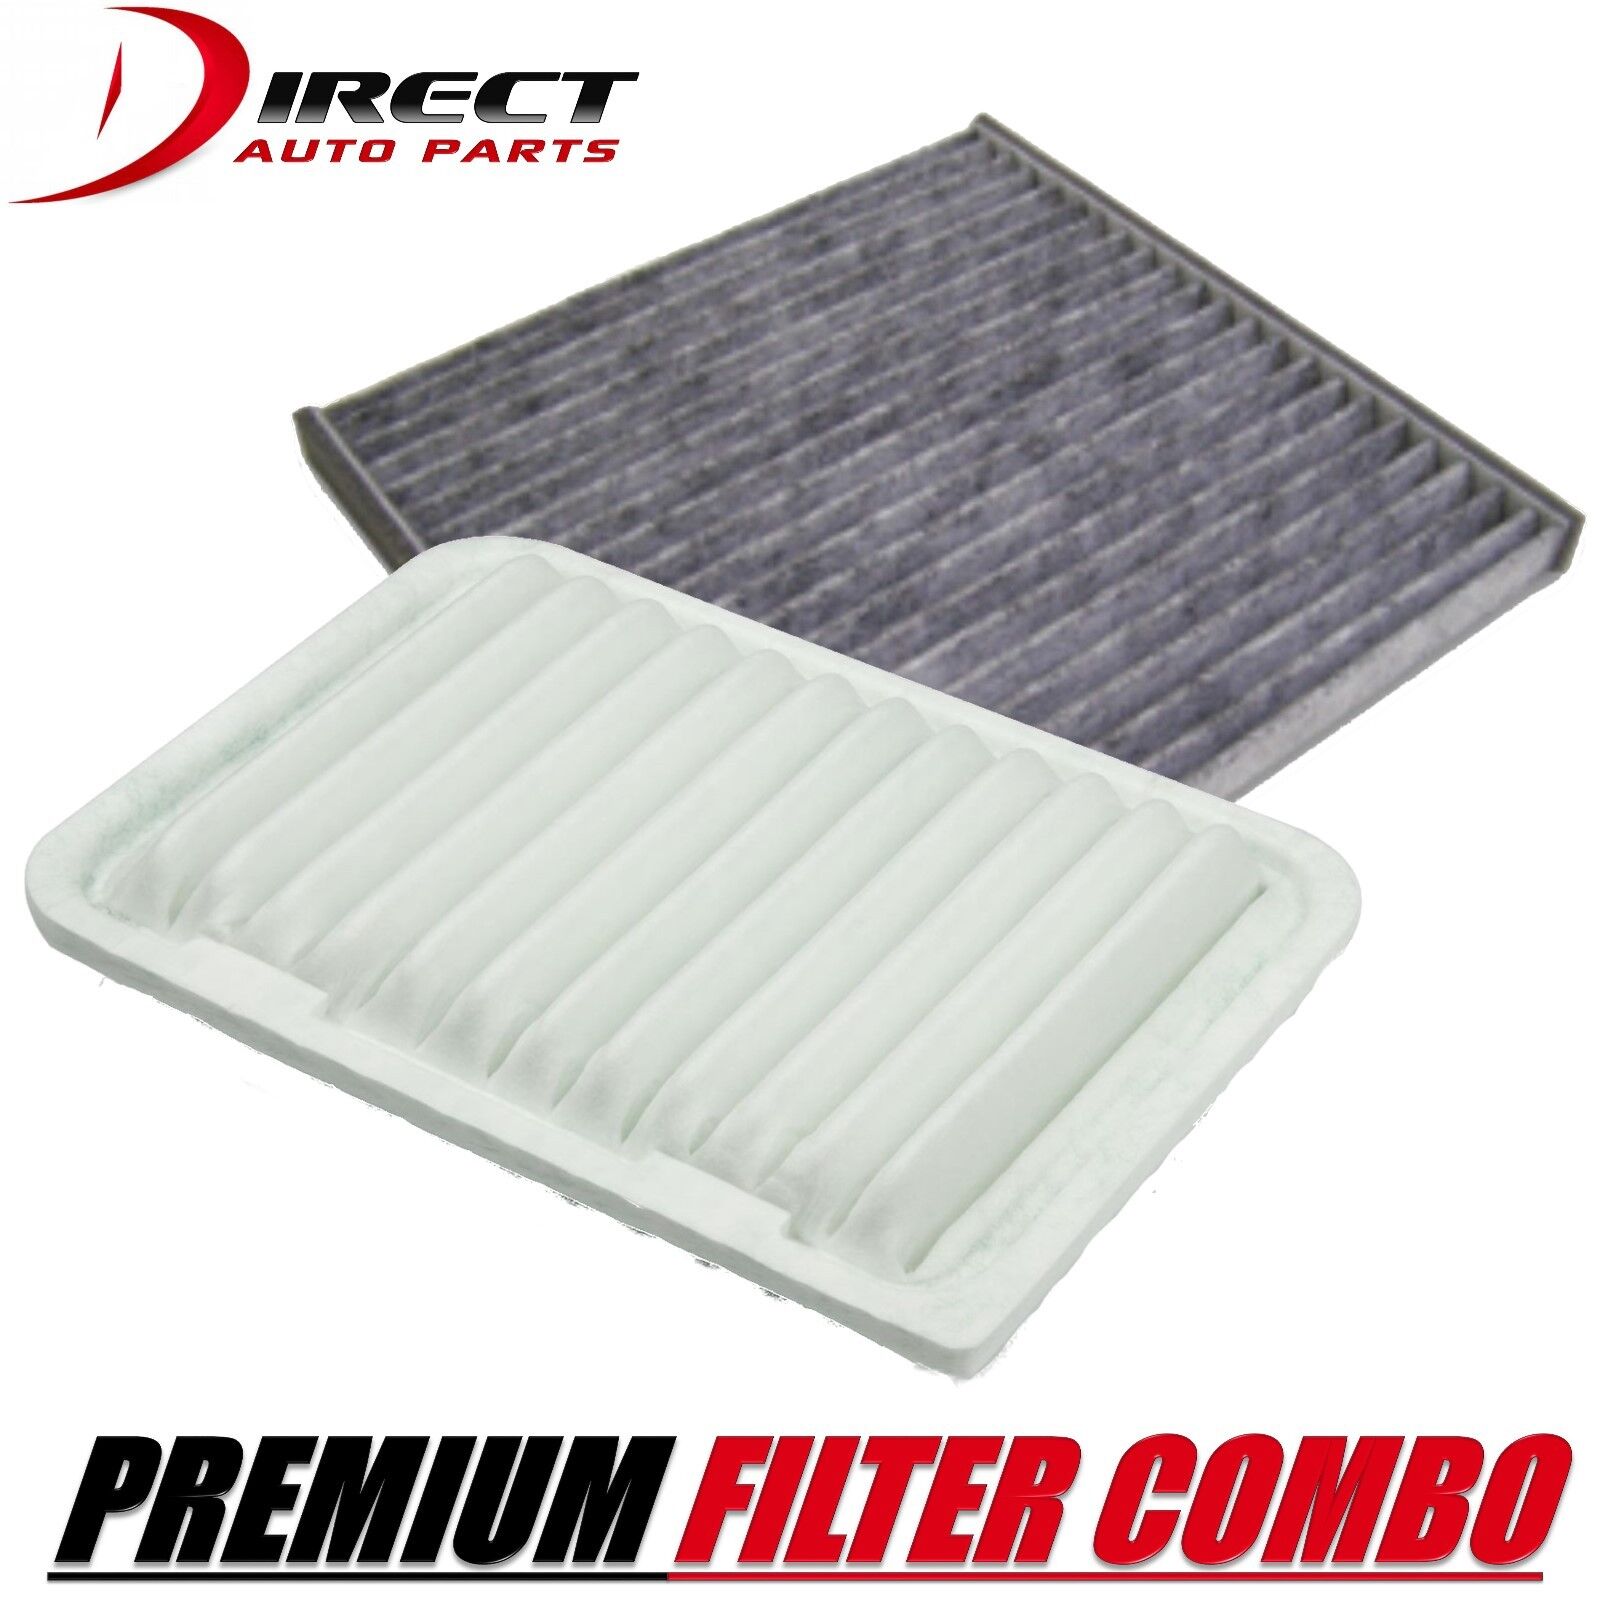 CARBON CABIN & AIR FILTER COMBO FOR LEXUS RX330 3.3L ENGINE 2004 - 2006